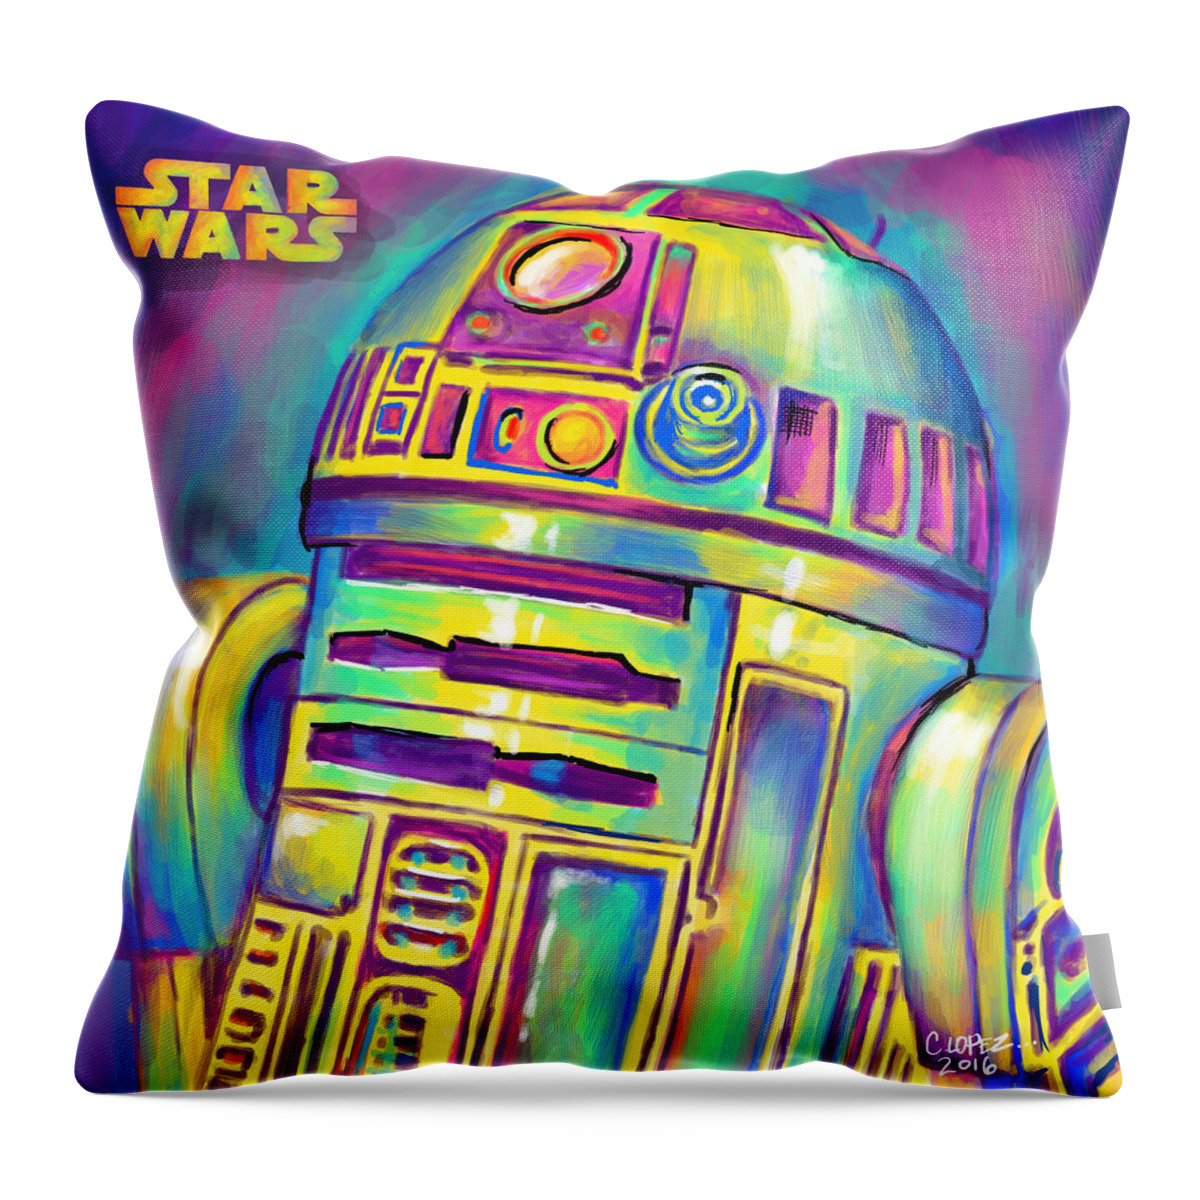 Star Wars R2D2 Throw Pillow by Christian Lopez - Pixels